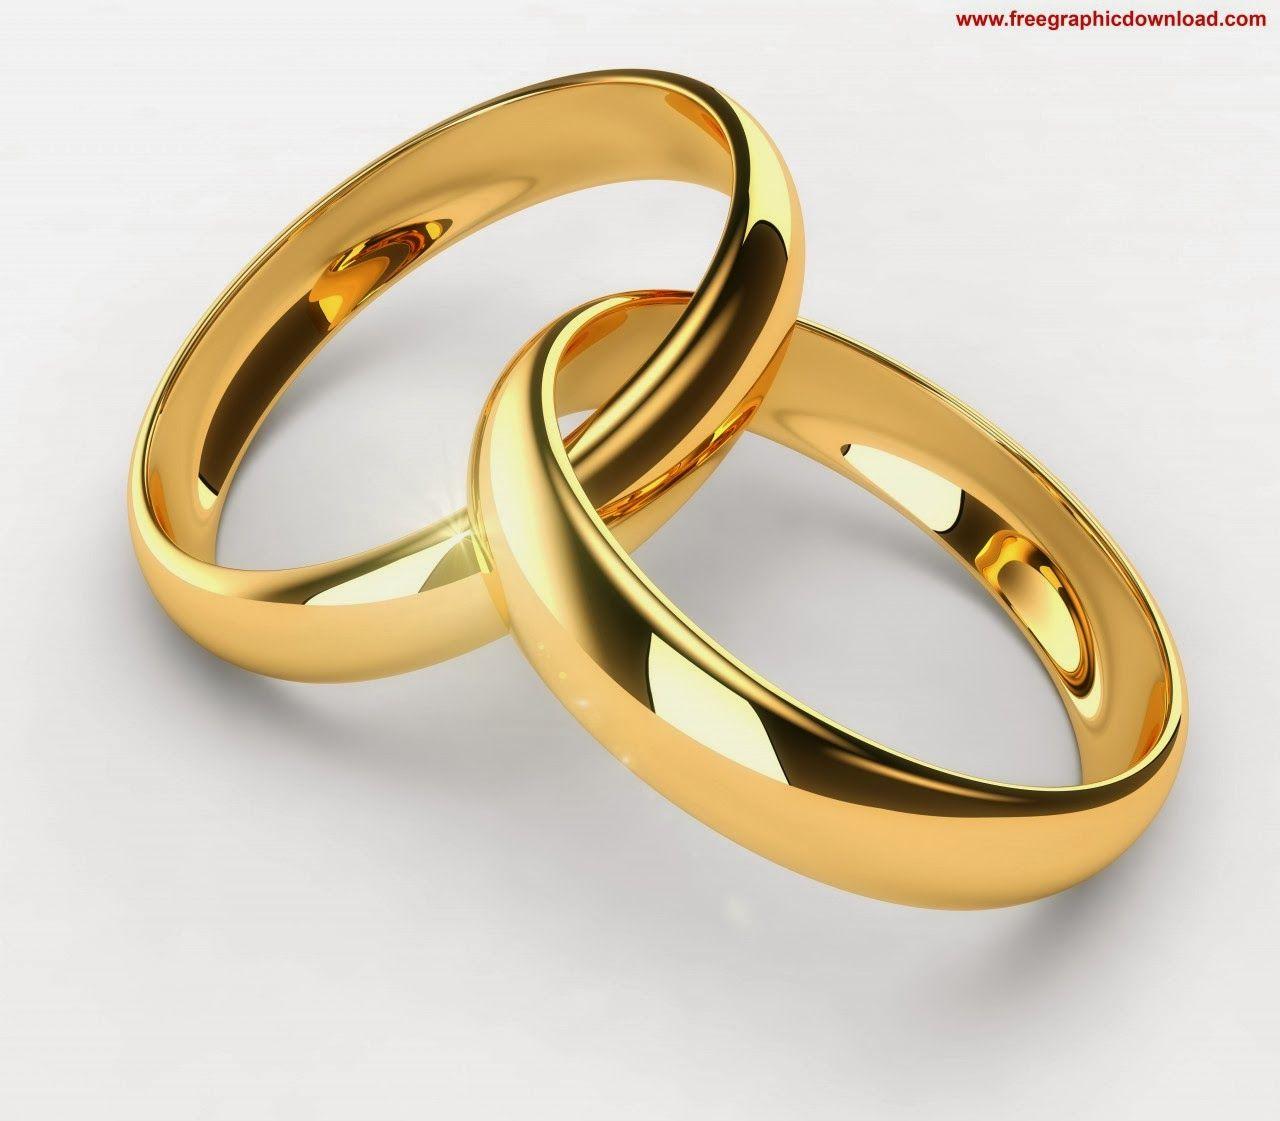 Image for Gold Wedding Rings Wallpaper Free HD. Places to Visit